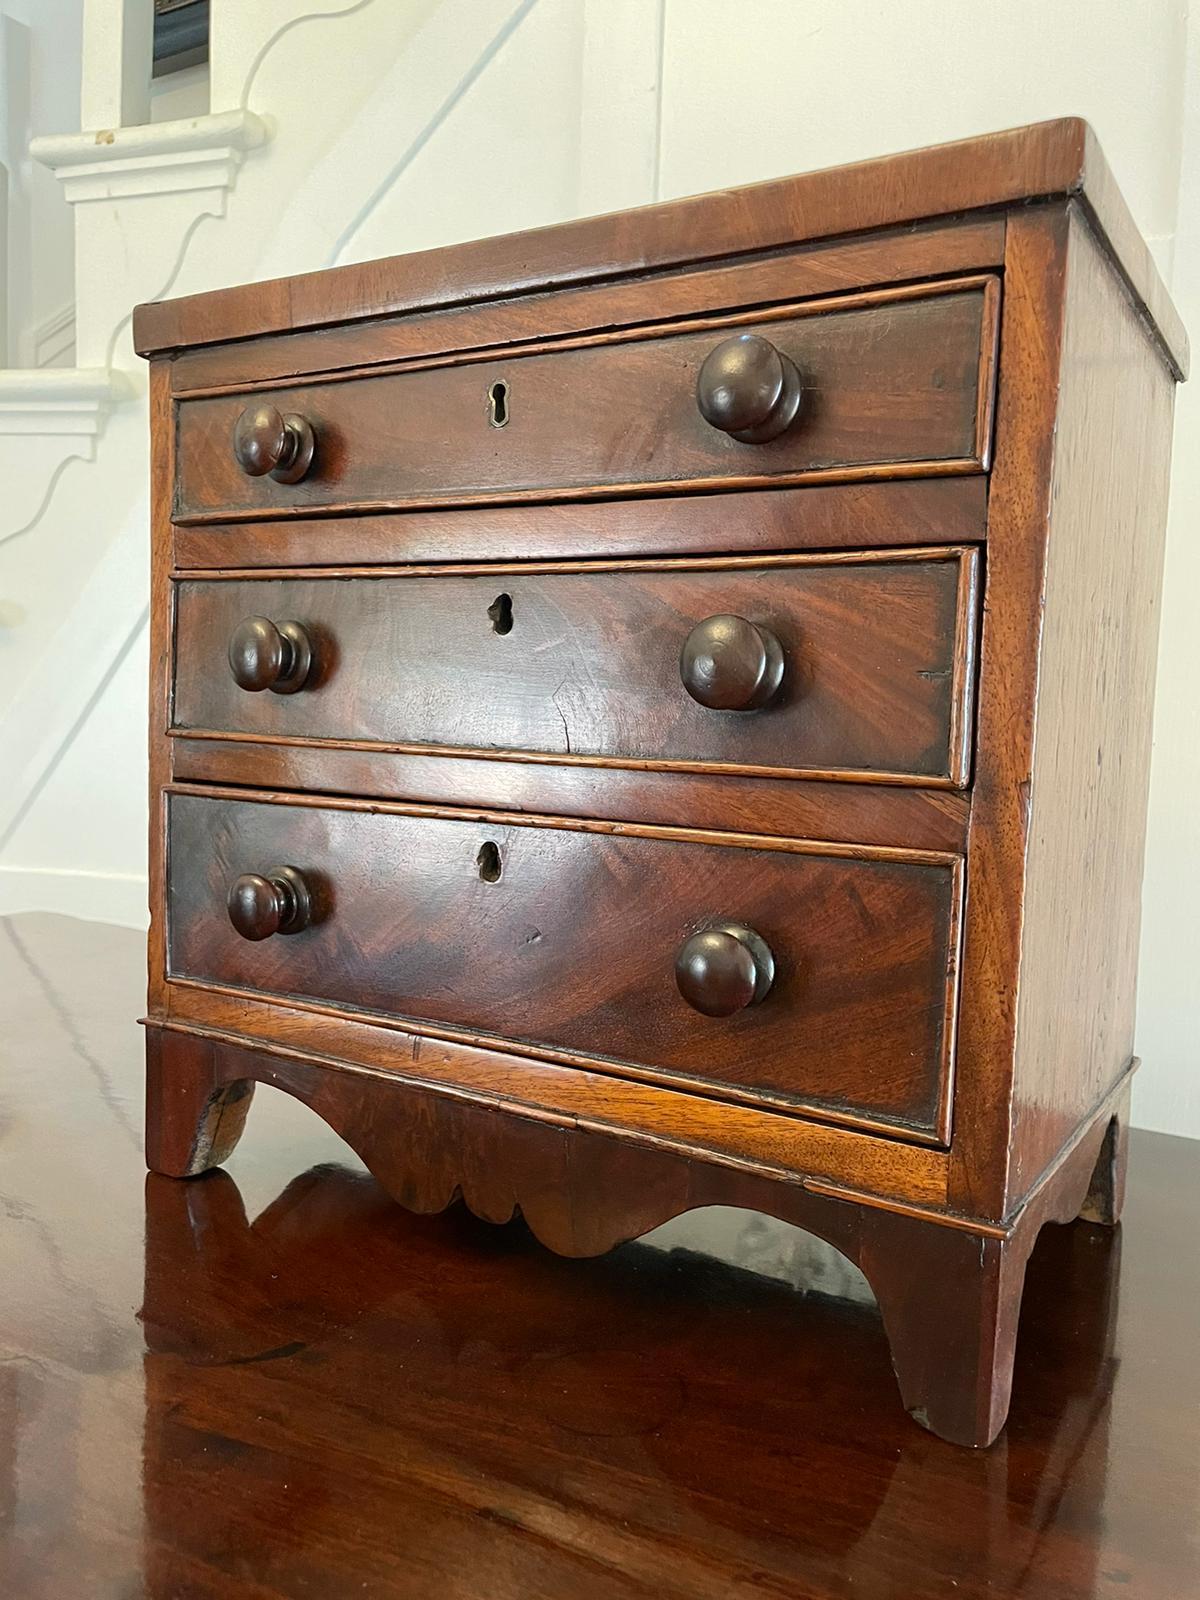 Antique George III quality figured mahogany miniature chest of 3 drawers having a quality crossbanded figured mahogany top above 3 mahogany cockbeeded drawers with original turned knobs standing on splayed bracket feet united by a shaped apron 

A